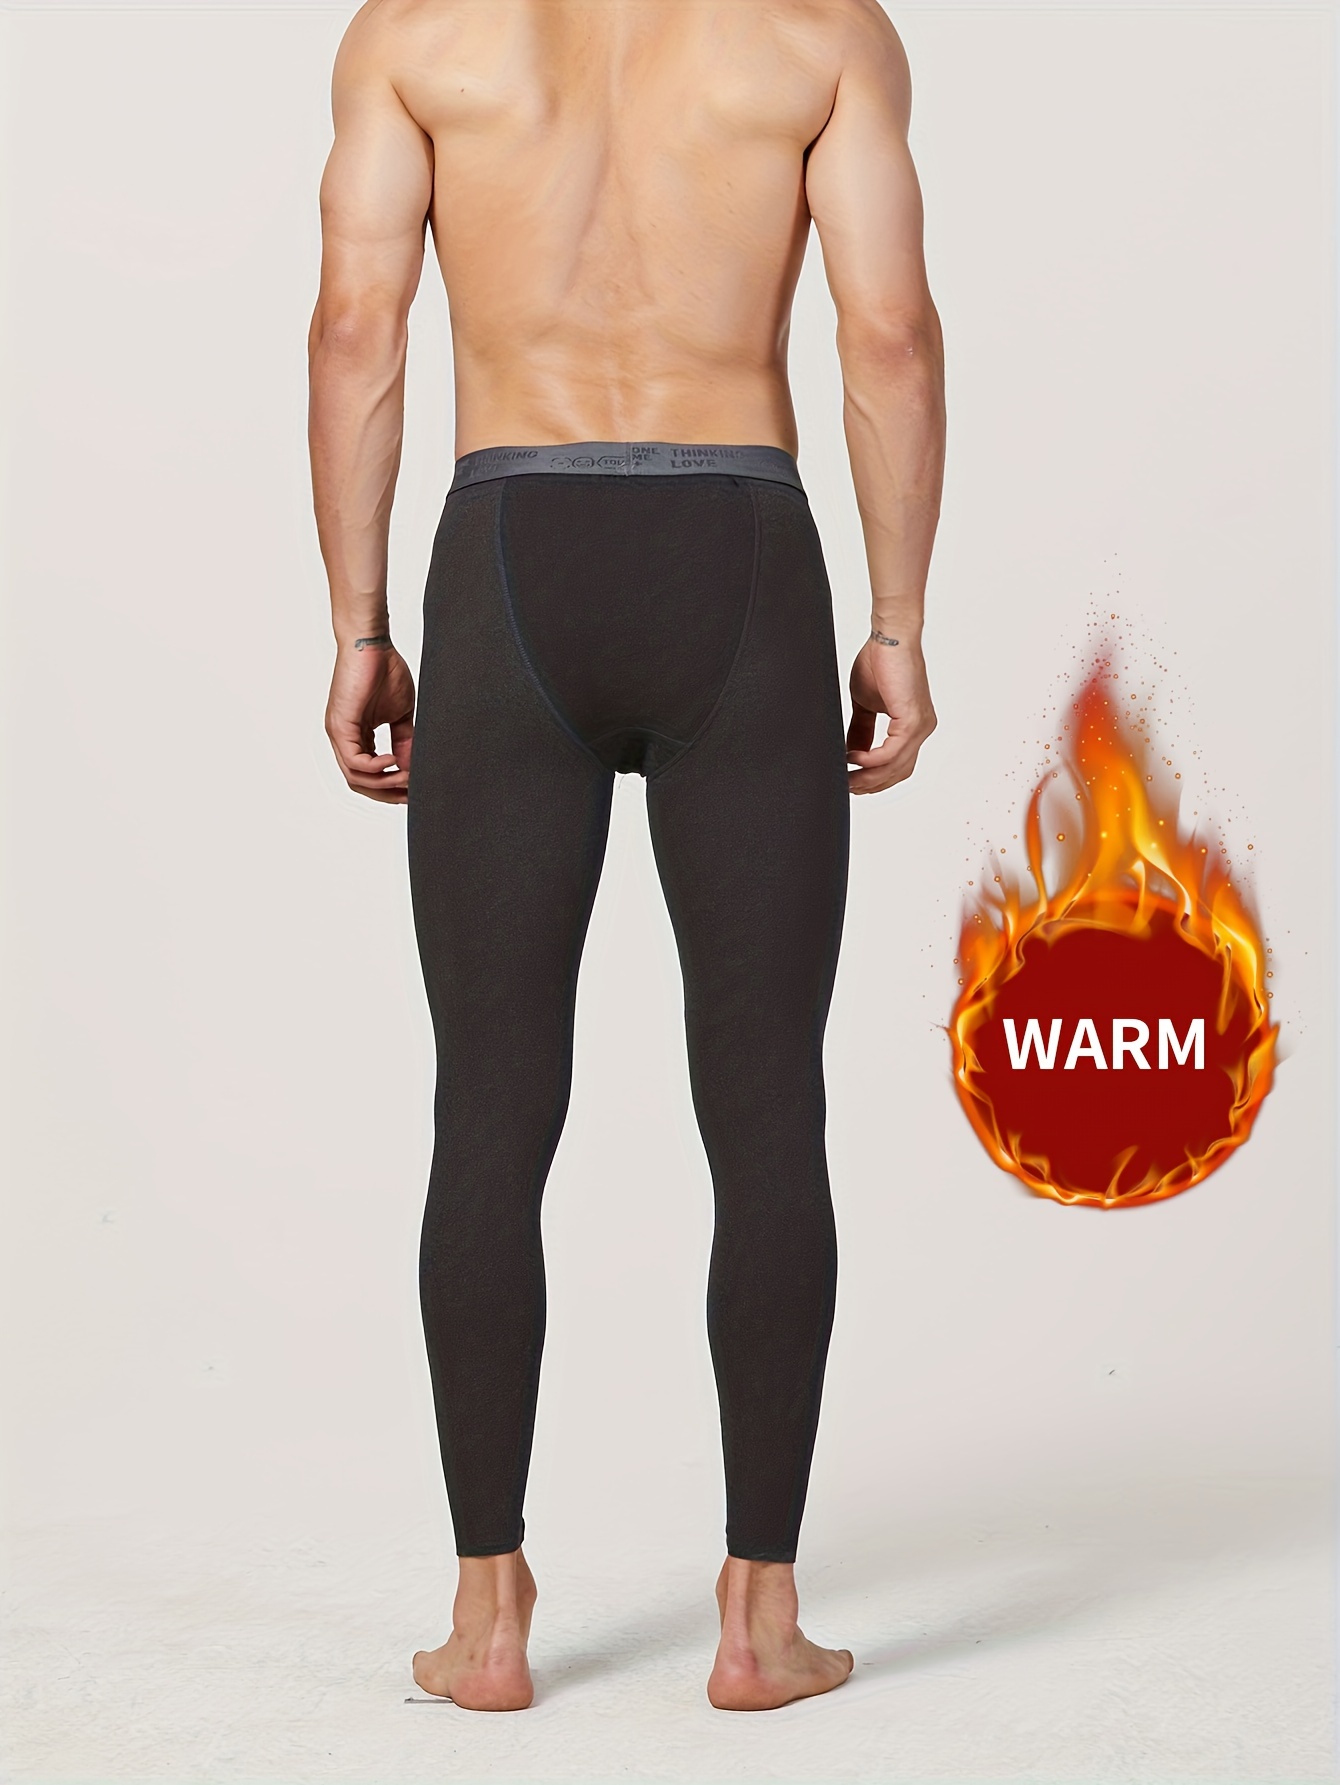 Clearance Men's Thermal Compression Pants Athletic Sports Leggings Running  Tights Cold Weather Winter Warm Base Layer Bottom 